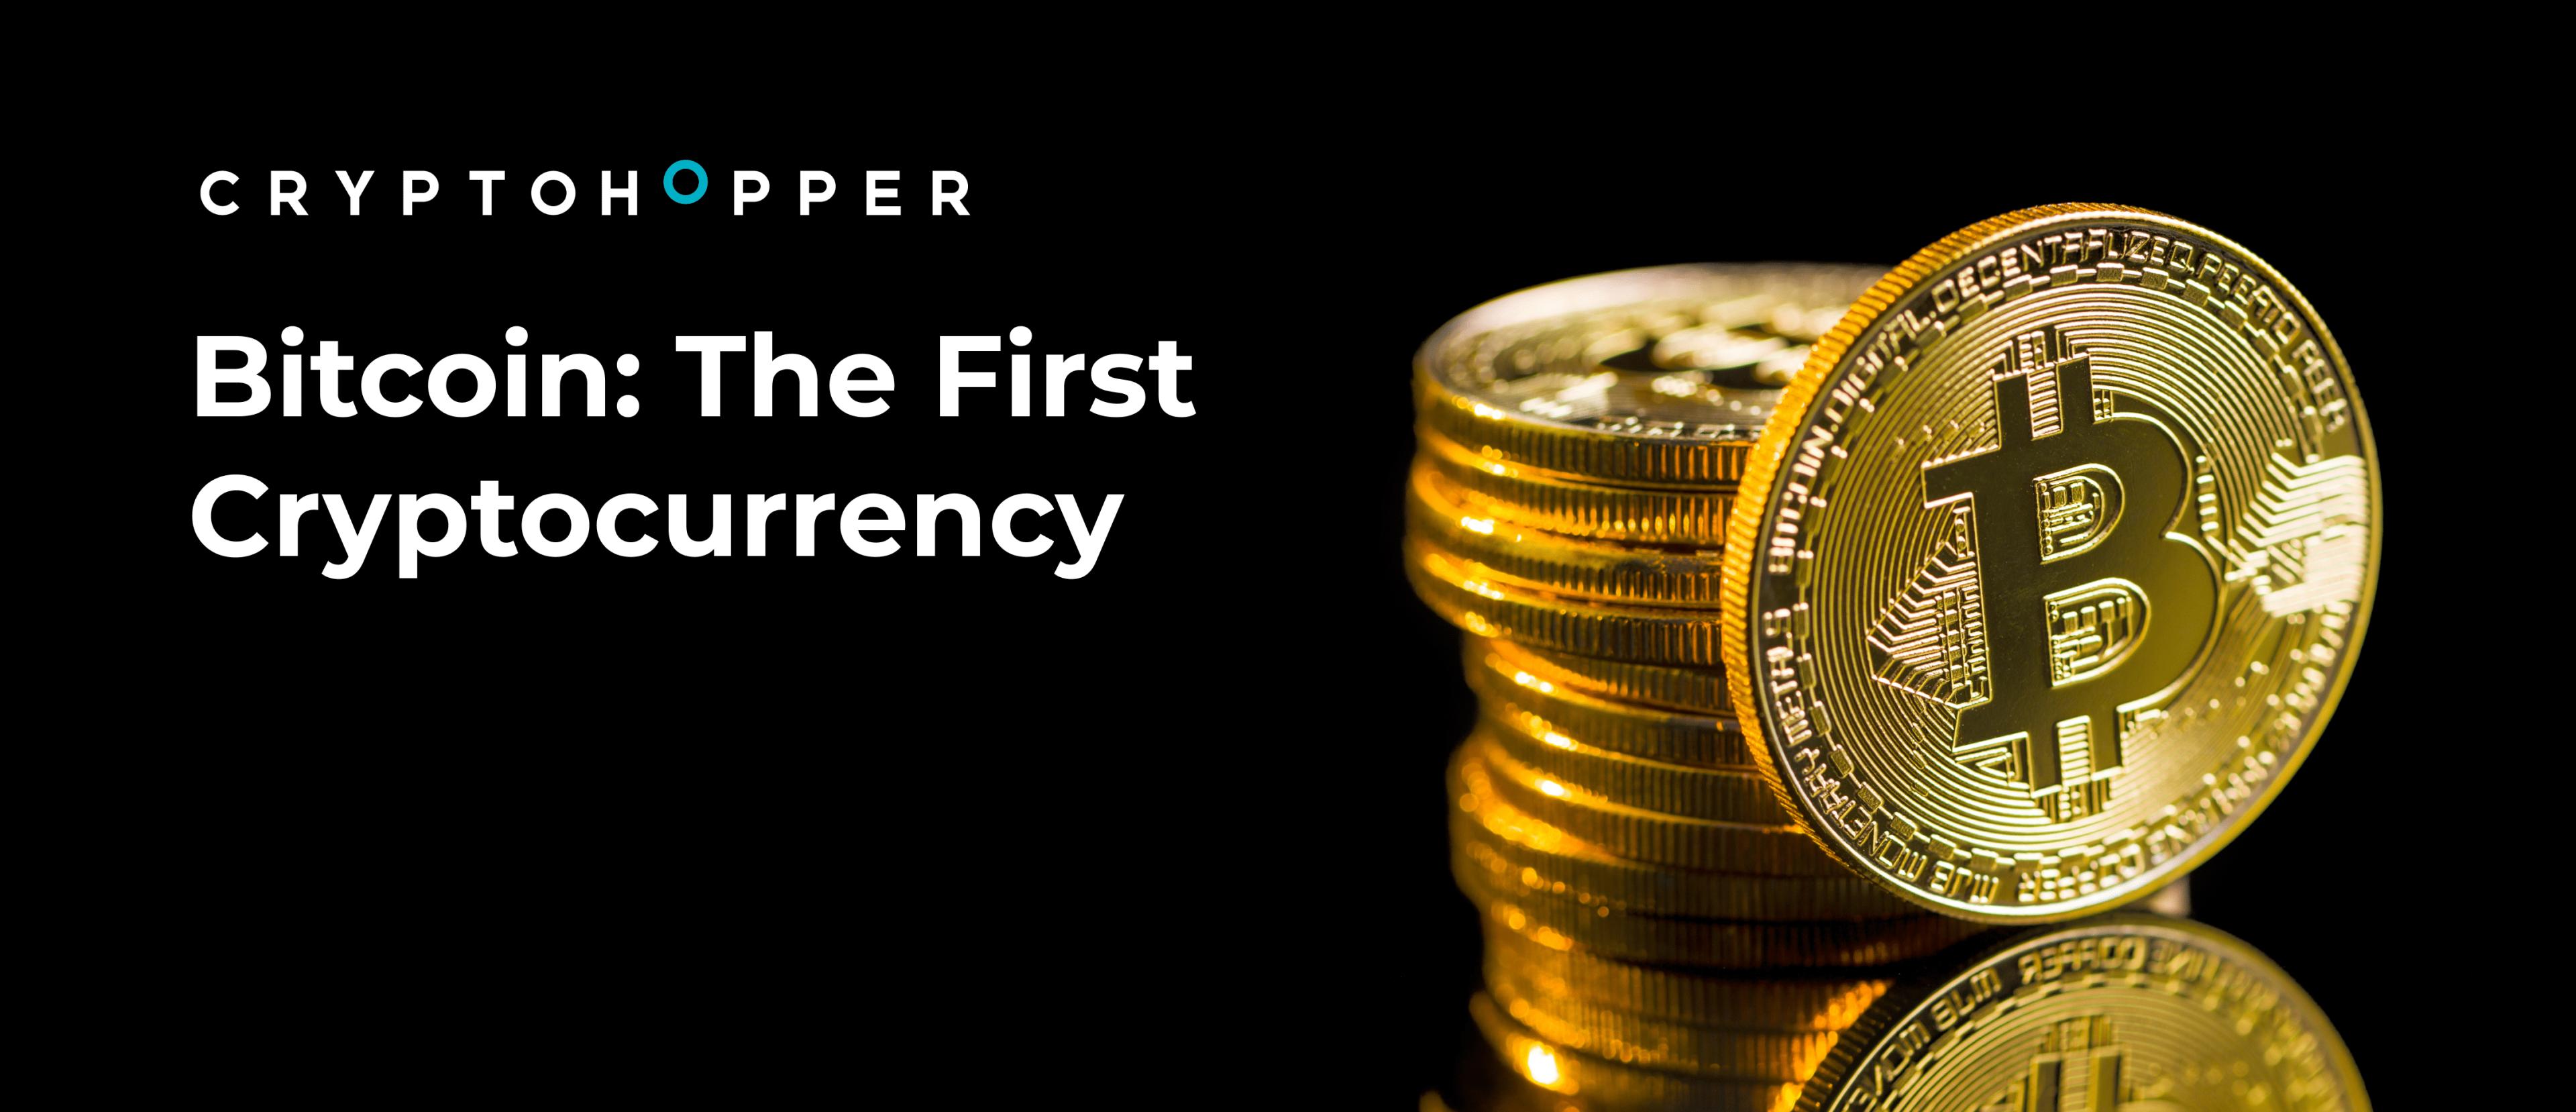 Bitcoin: The First Cryptocurrency